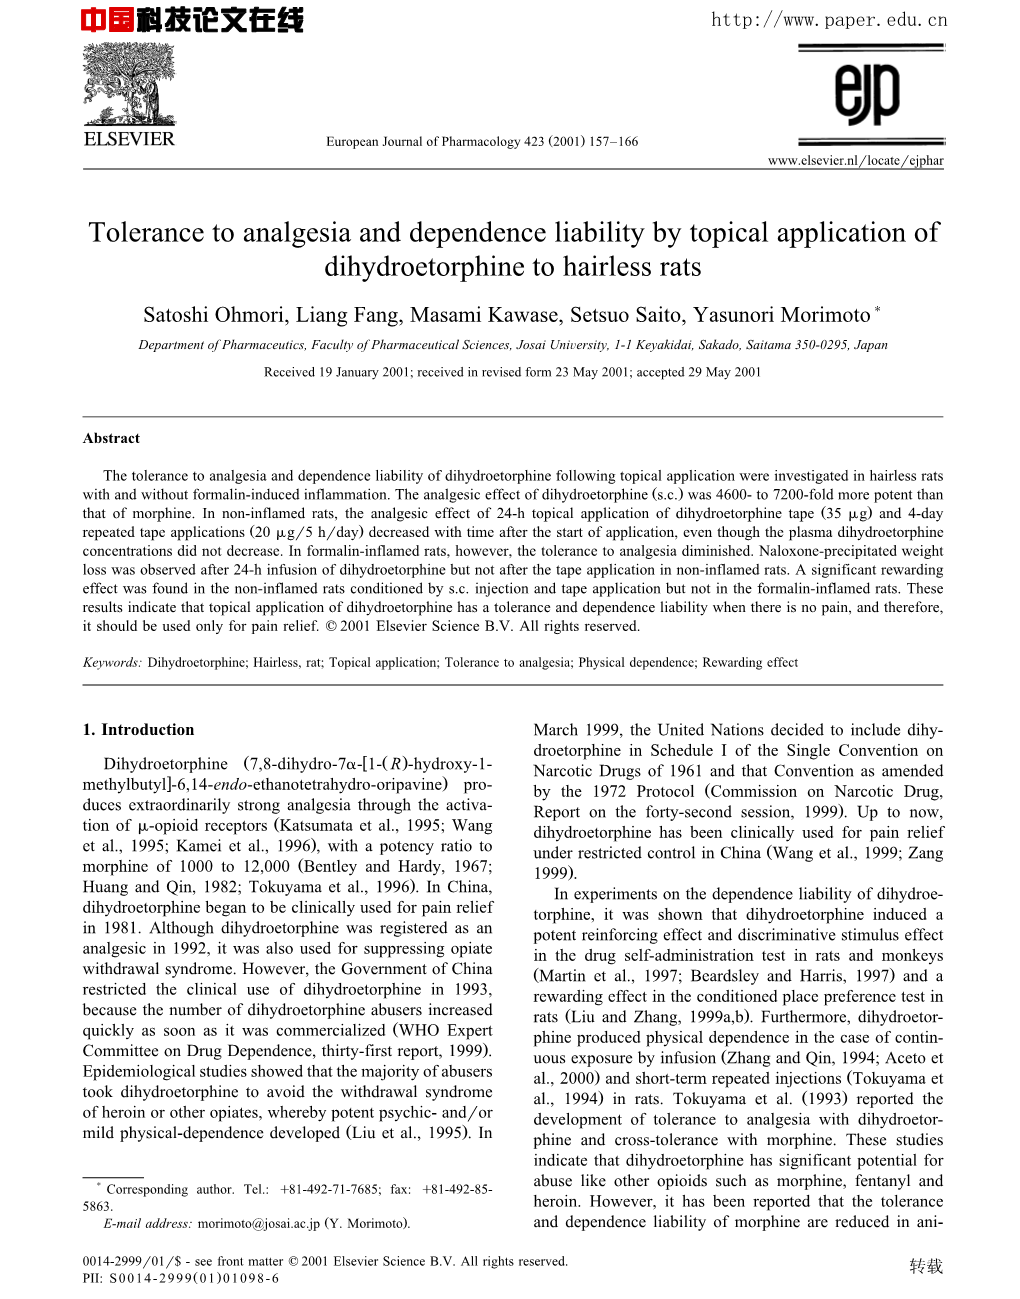 Tolerance to Analgesia and Dependence Liability by Topical Application of Dihydroetorphine to Hairless Rats